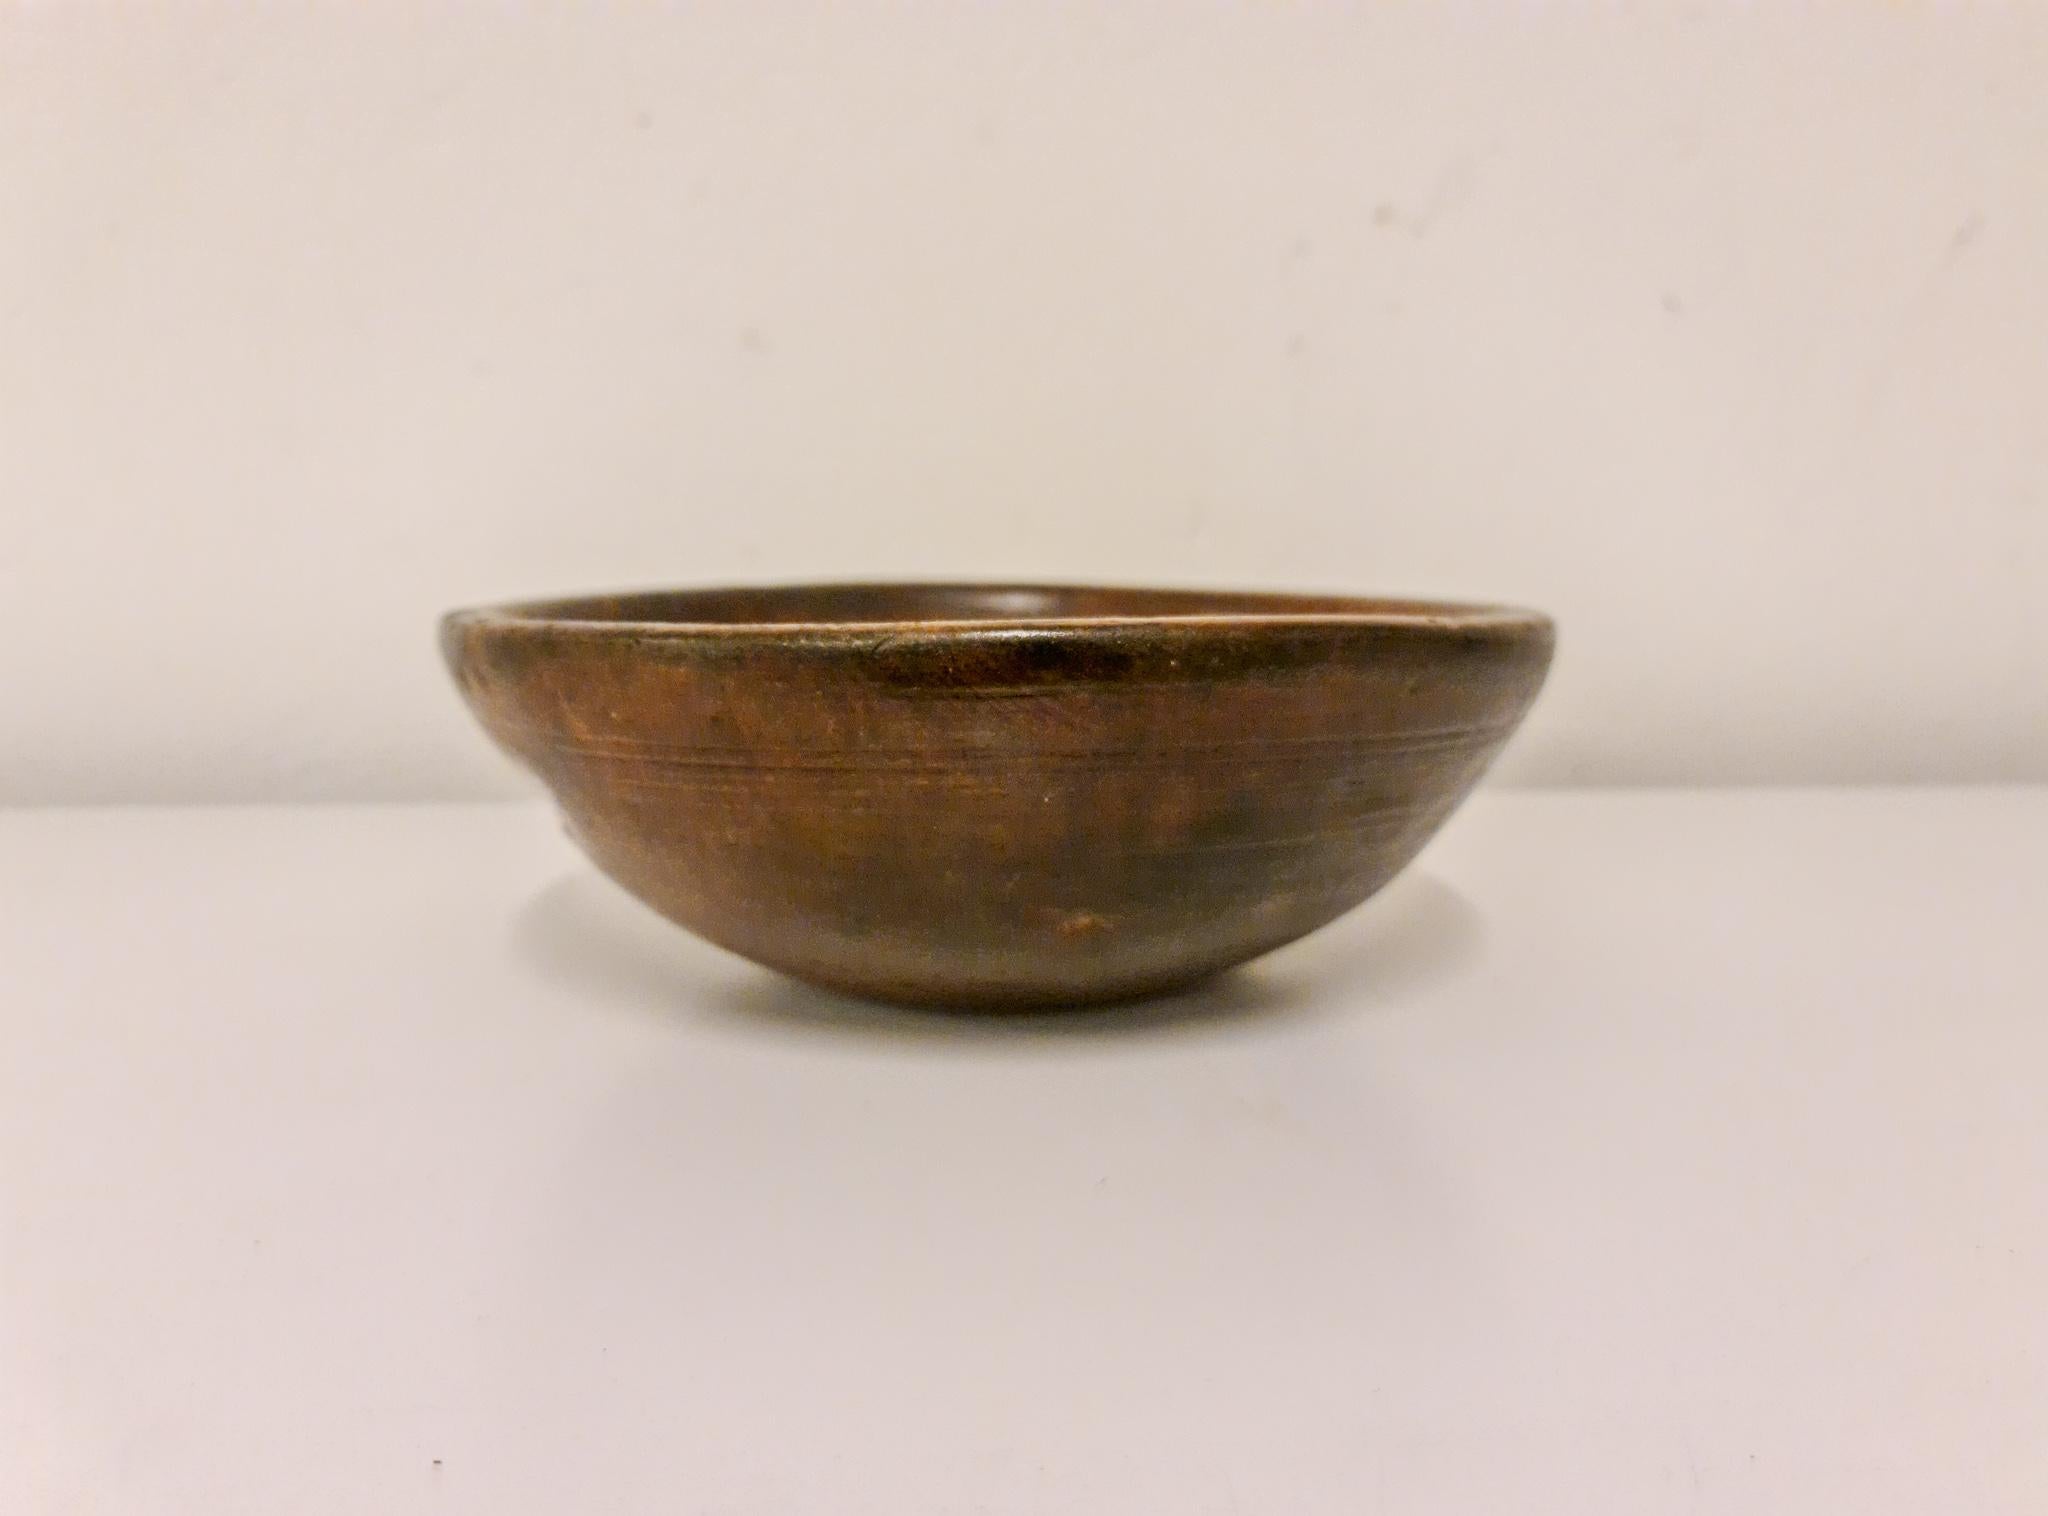 An antique and unique organic wooden bowl. With highly appealing patina, and the inside of the bowl with faded painting makes this a unique and desirable piece. Produced in Sweden, early 19th century. 
These bowls where especially important for